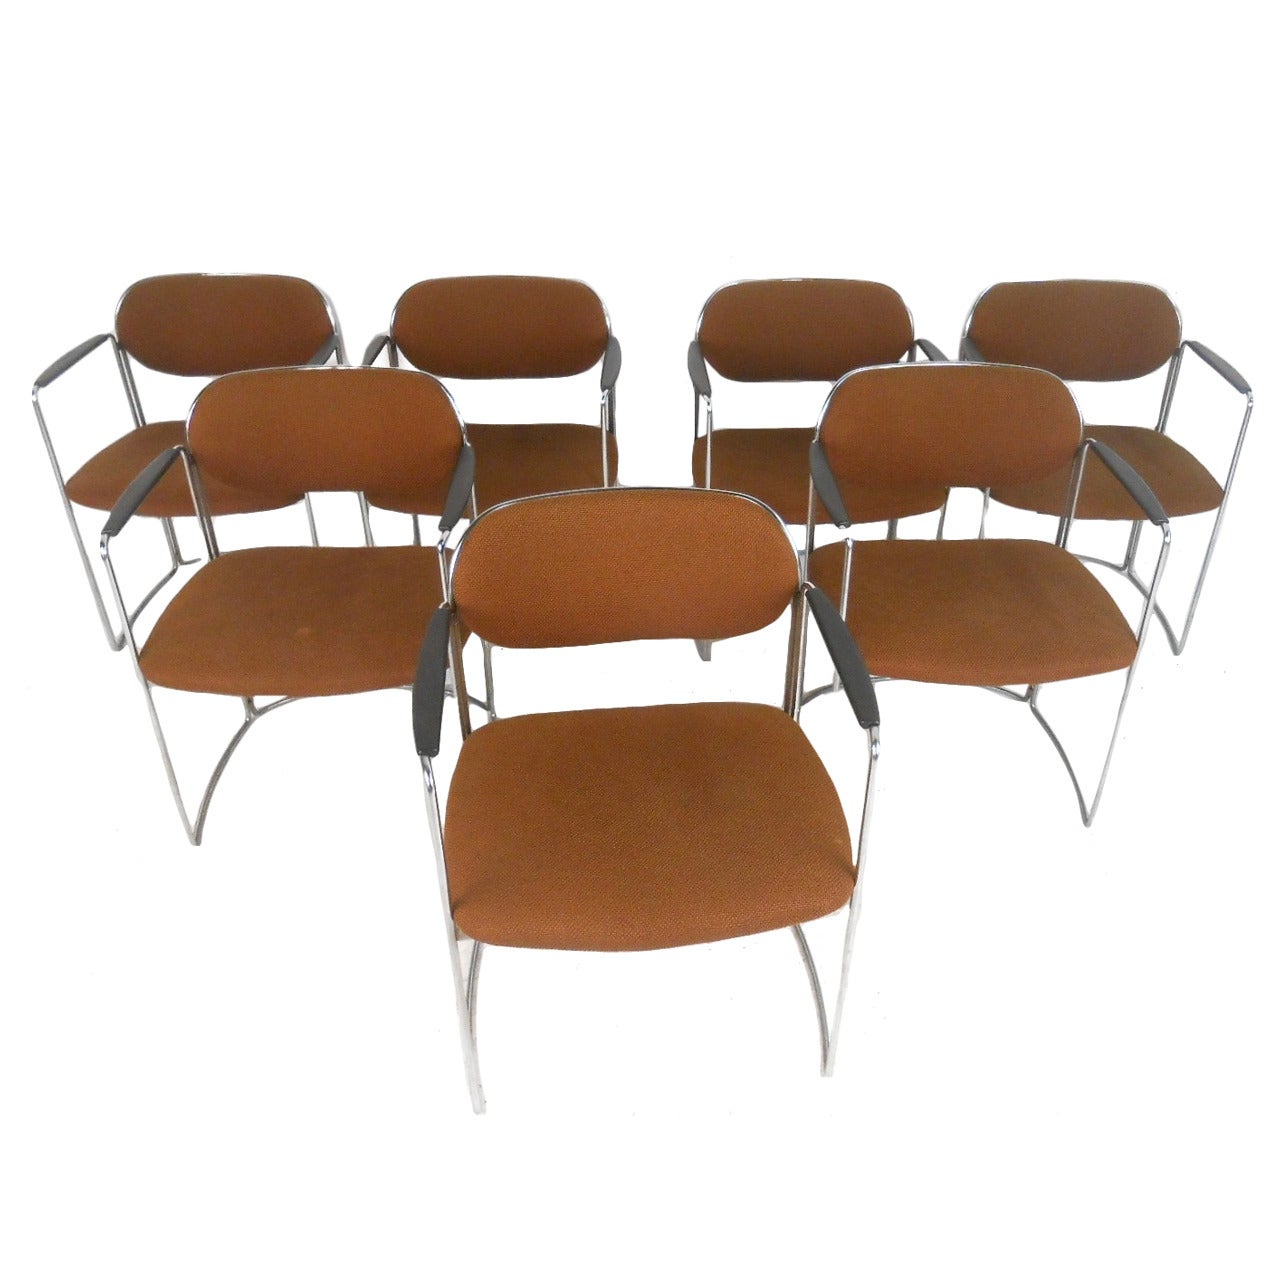 Set of Seven Vintage Modern Conference or Dining Chairs